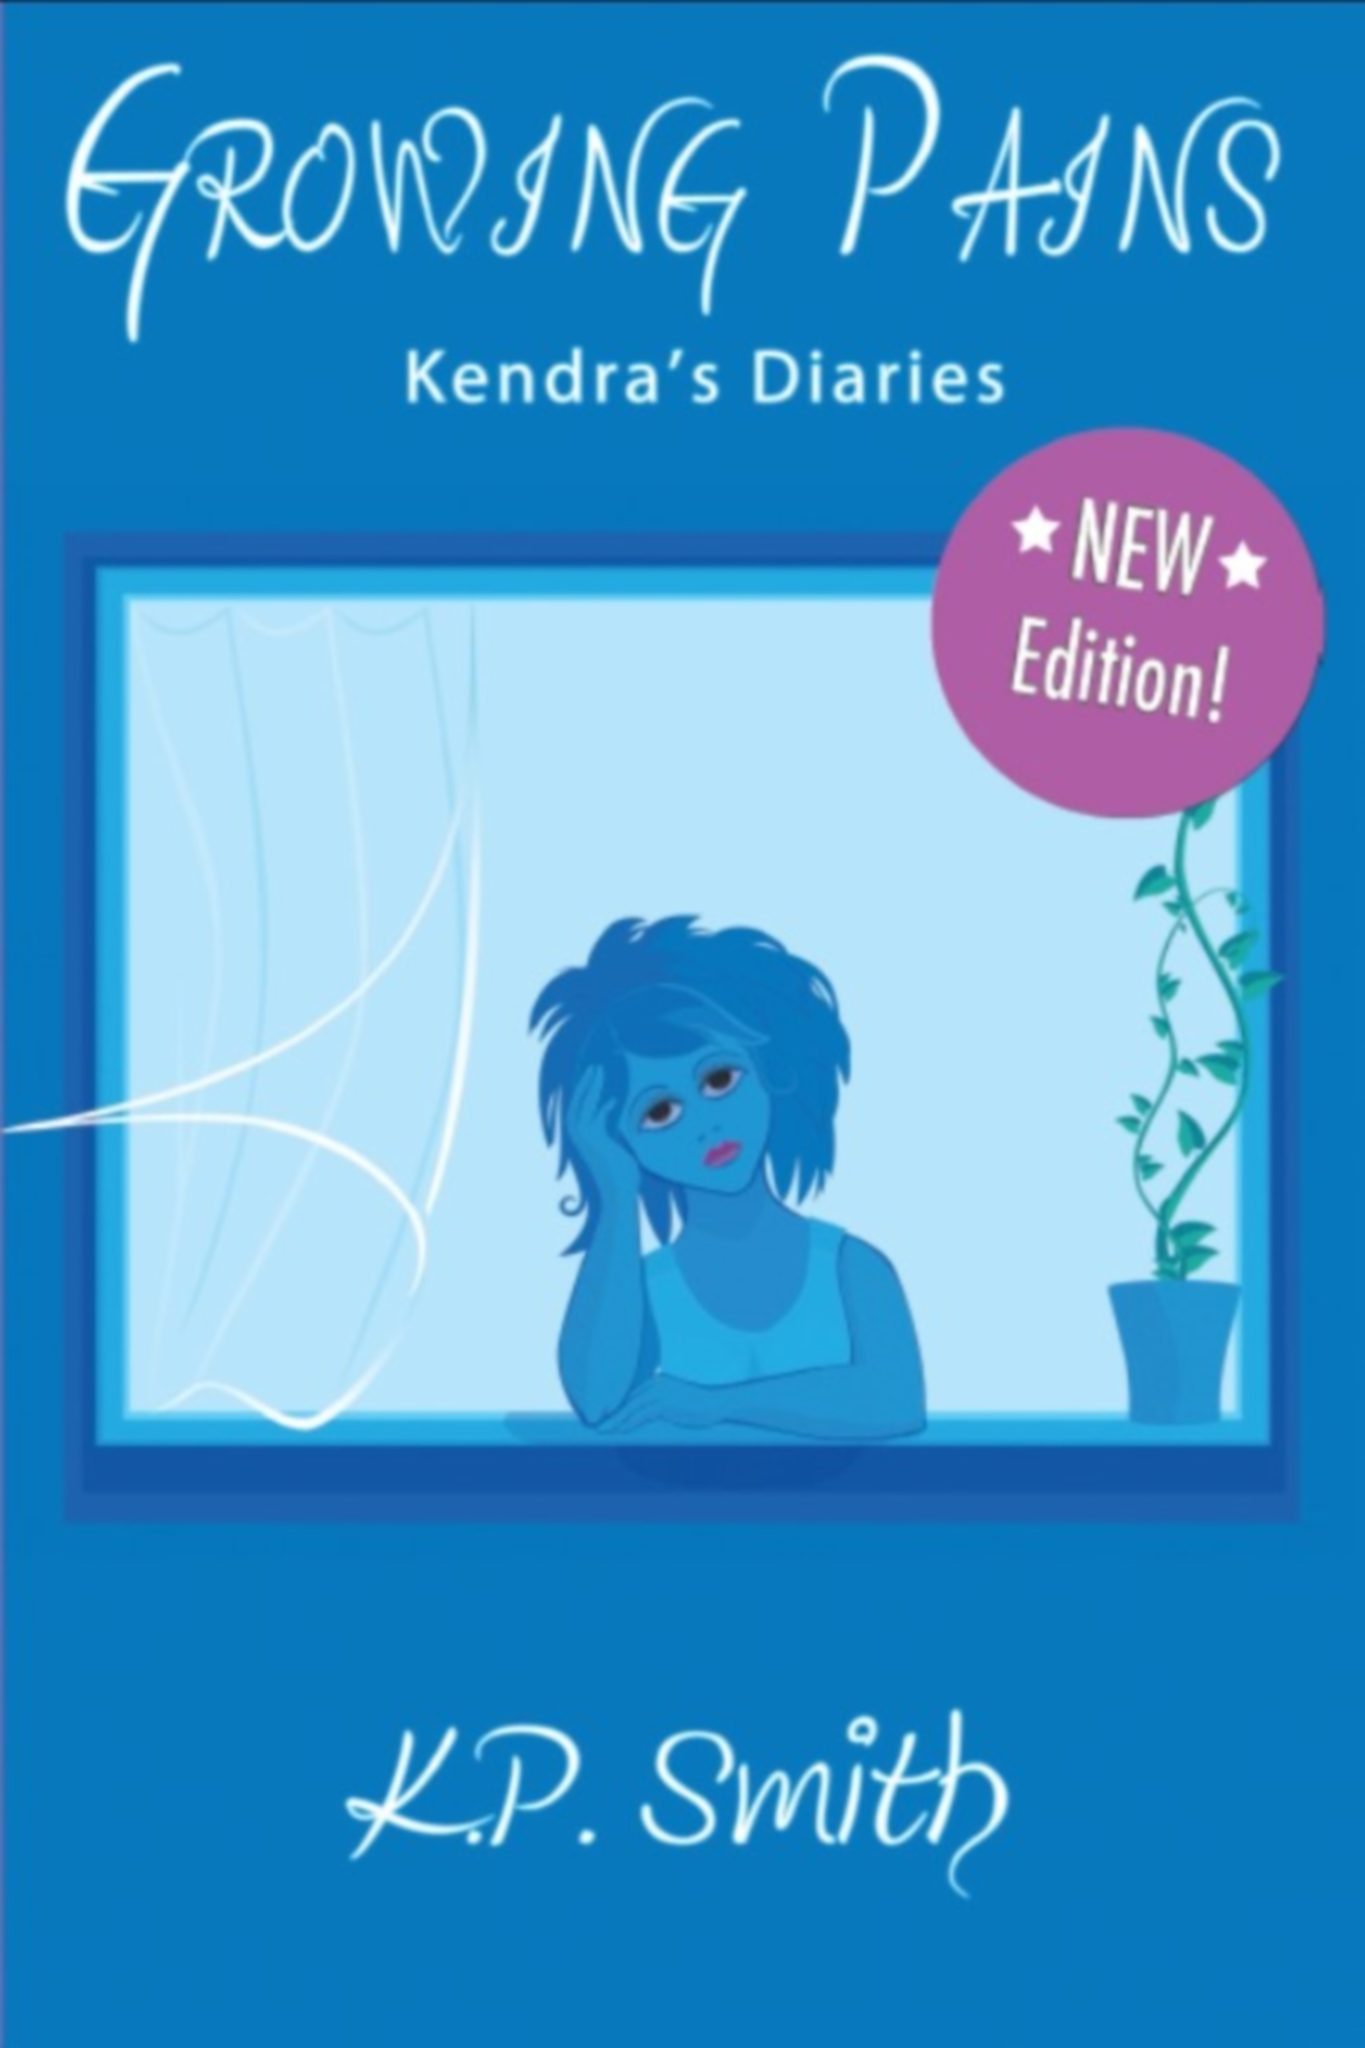 FREE: Growing Pains: Kendra’s Diaries by KP Smith